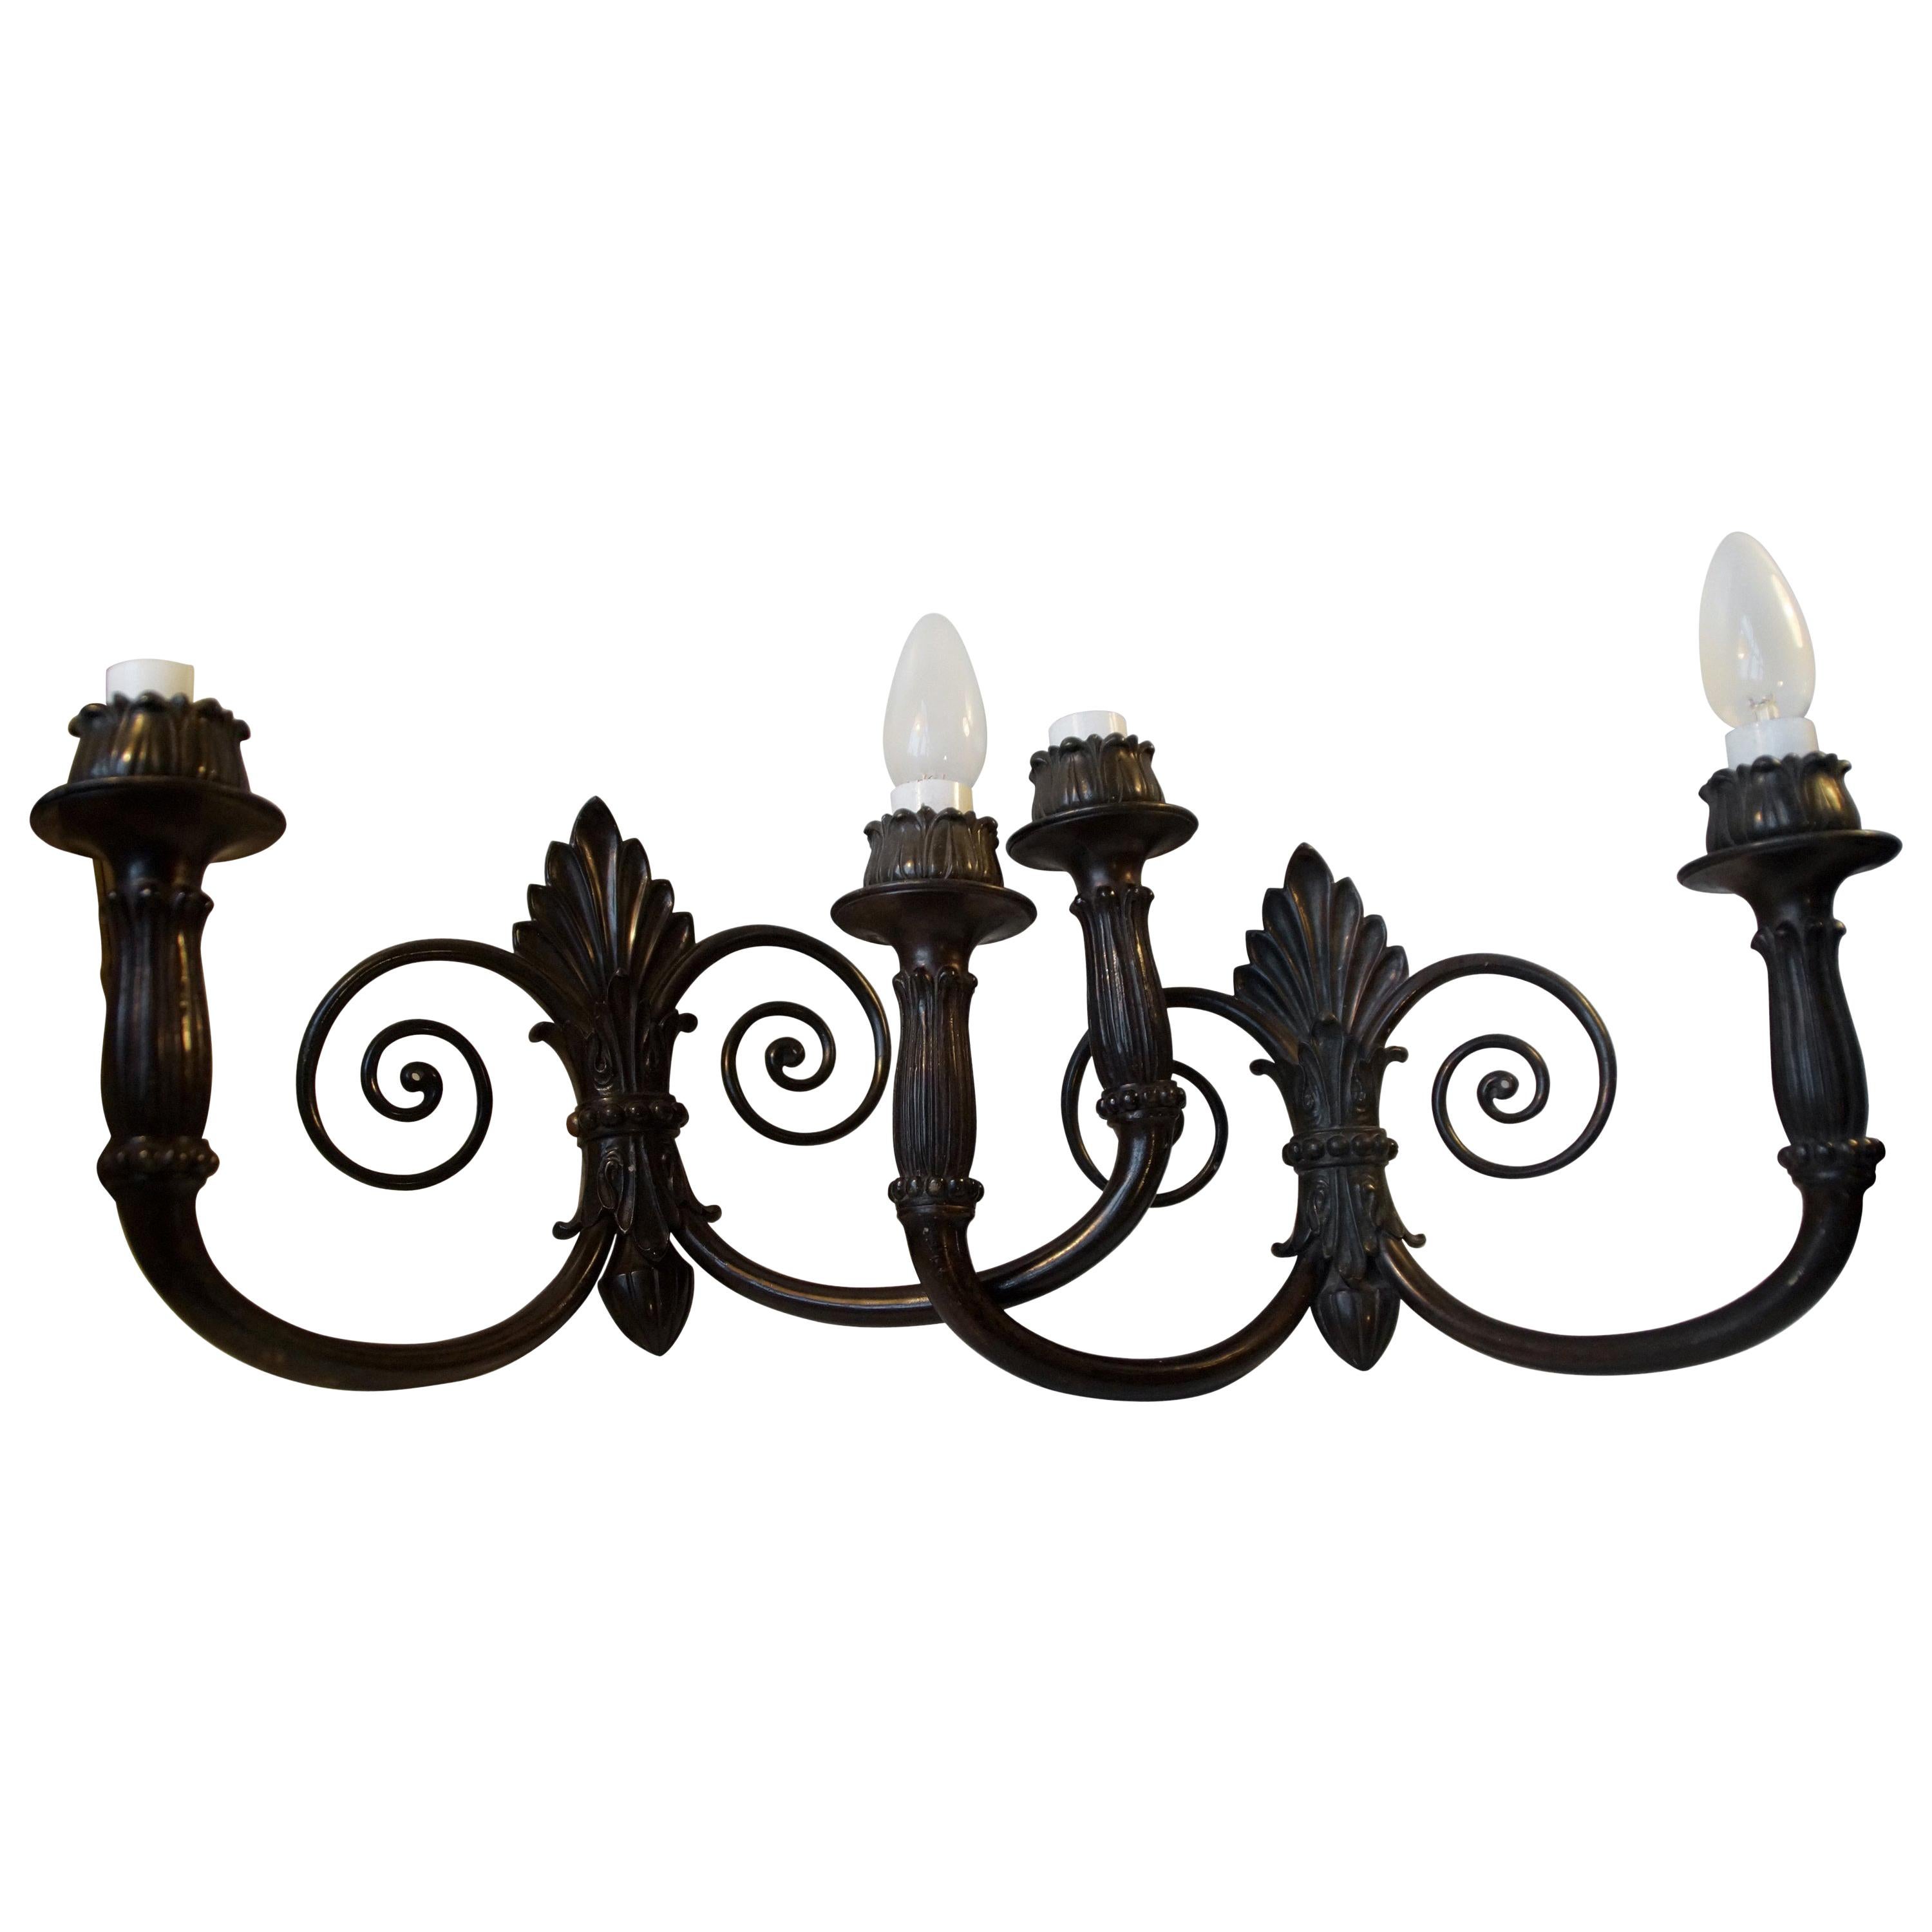 Antique French Esthetic Two-Armed Bronze Sconces with 'Swirl', 1900s For Sale